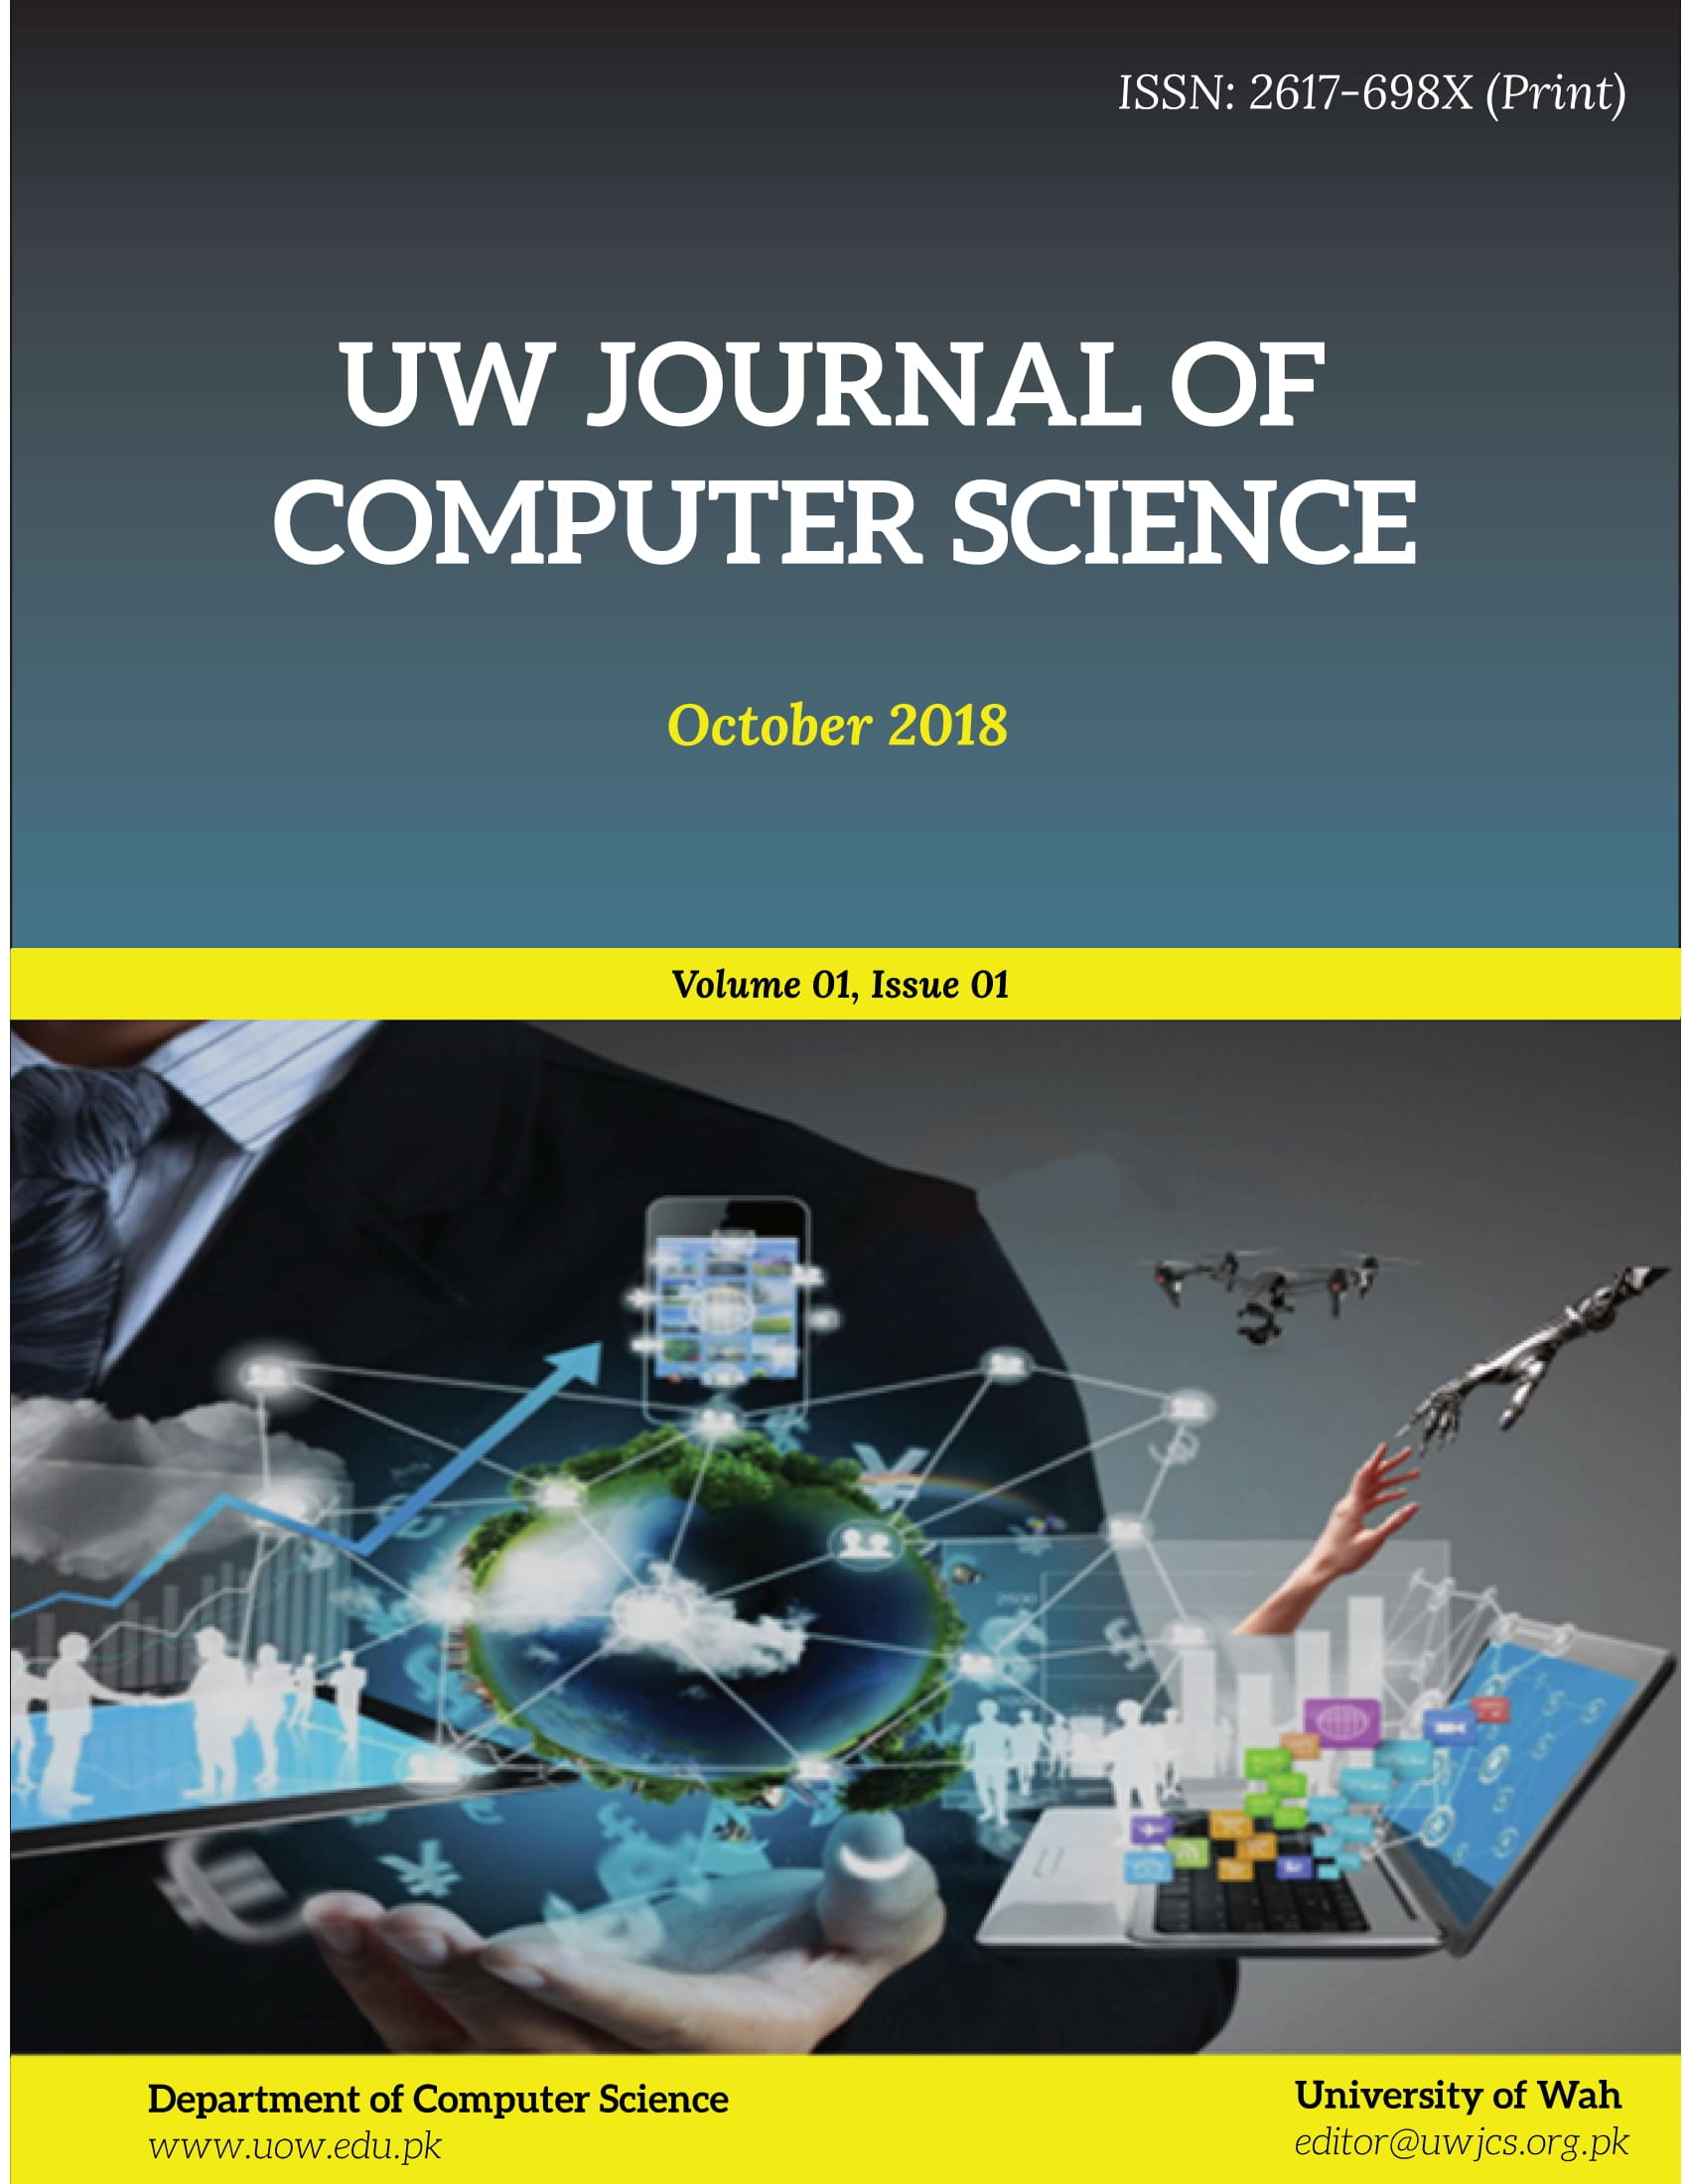 					View Vol. 1 No. 1 (2018): University of Wah Journal of Computer Science
				